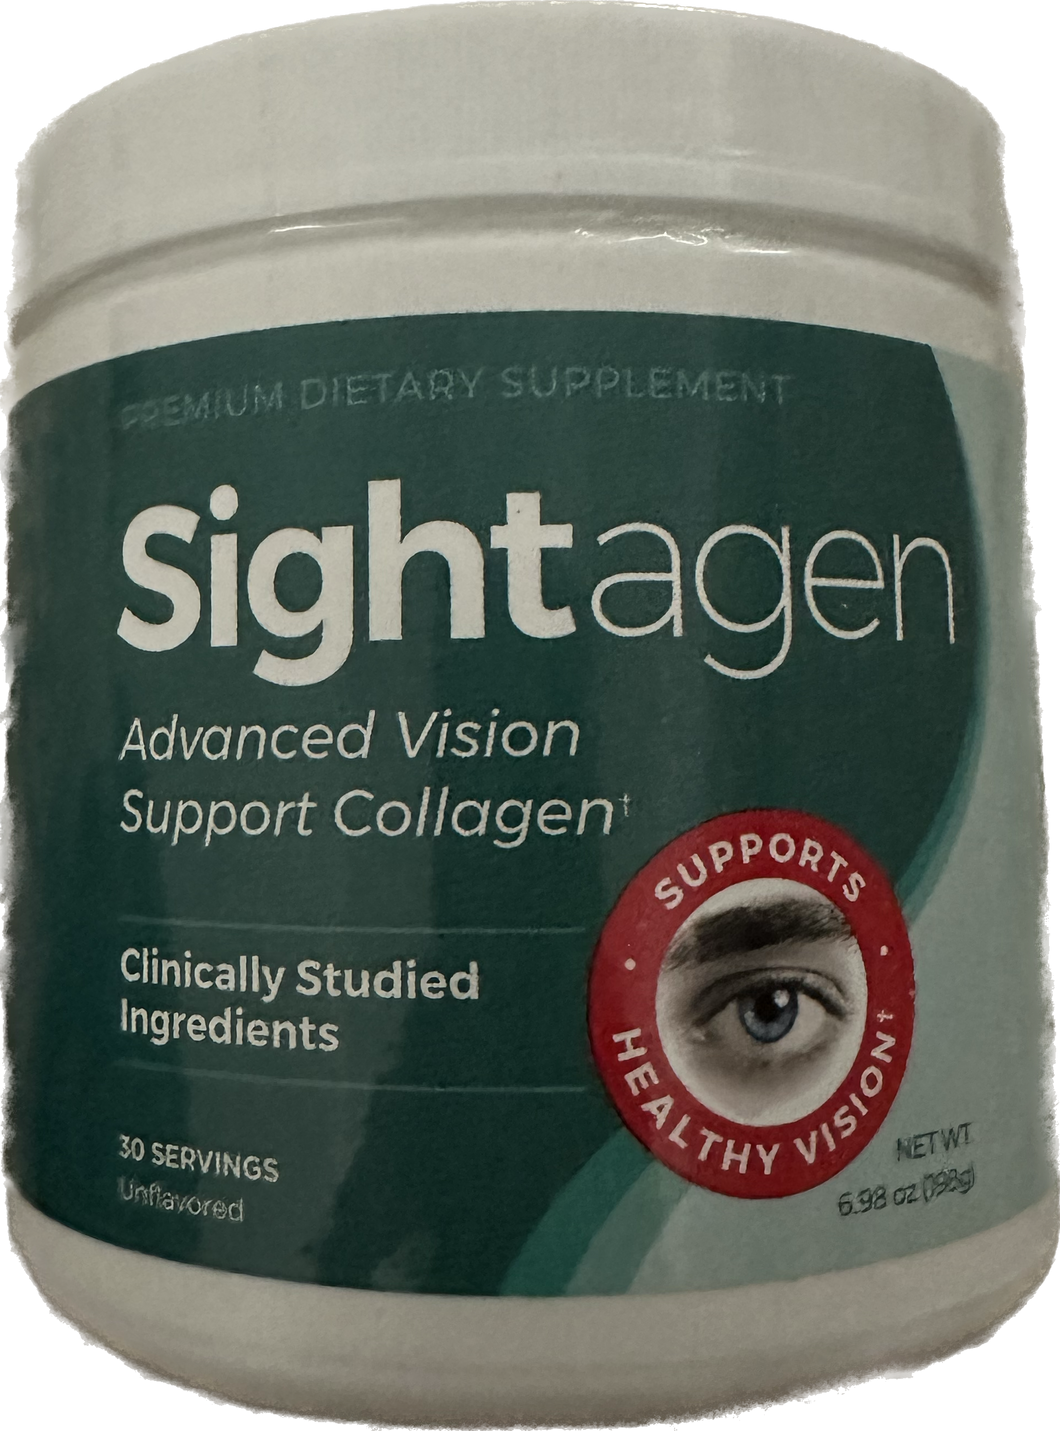 Sightagen ™ Advanced Vision Support Collagen - Natural Health & Beauty